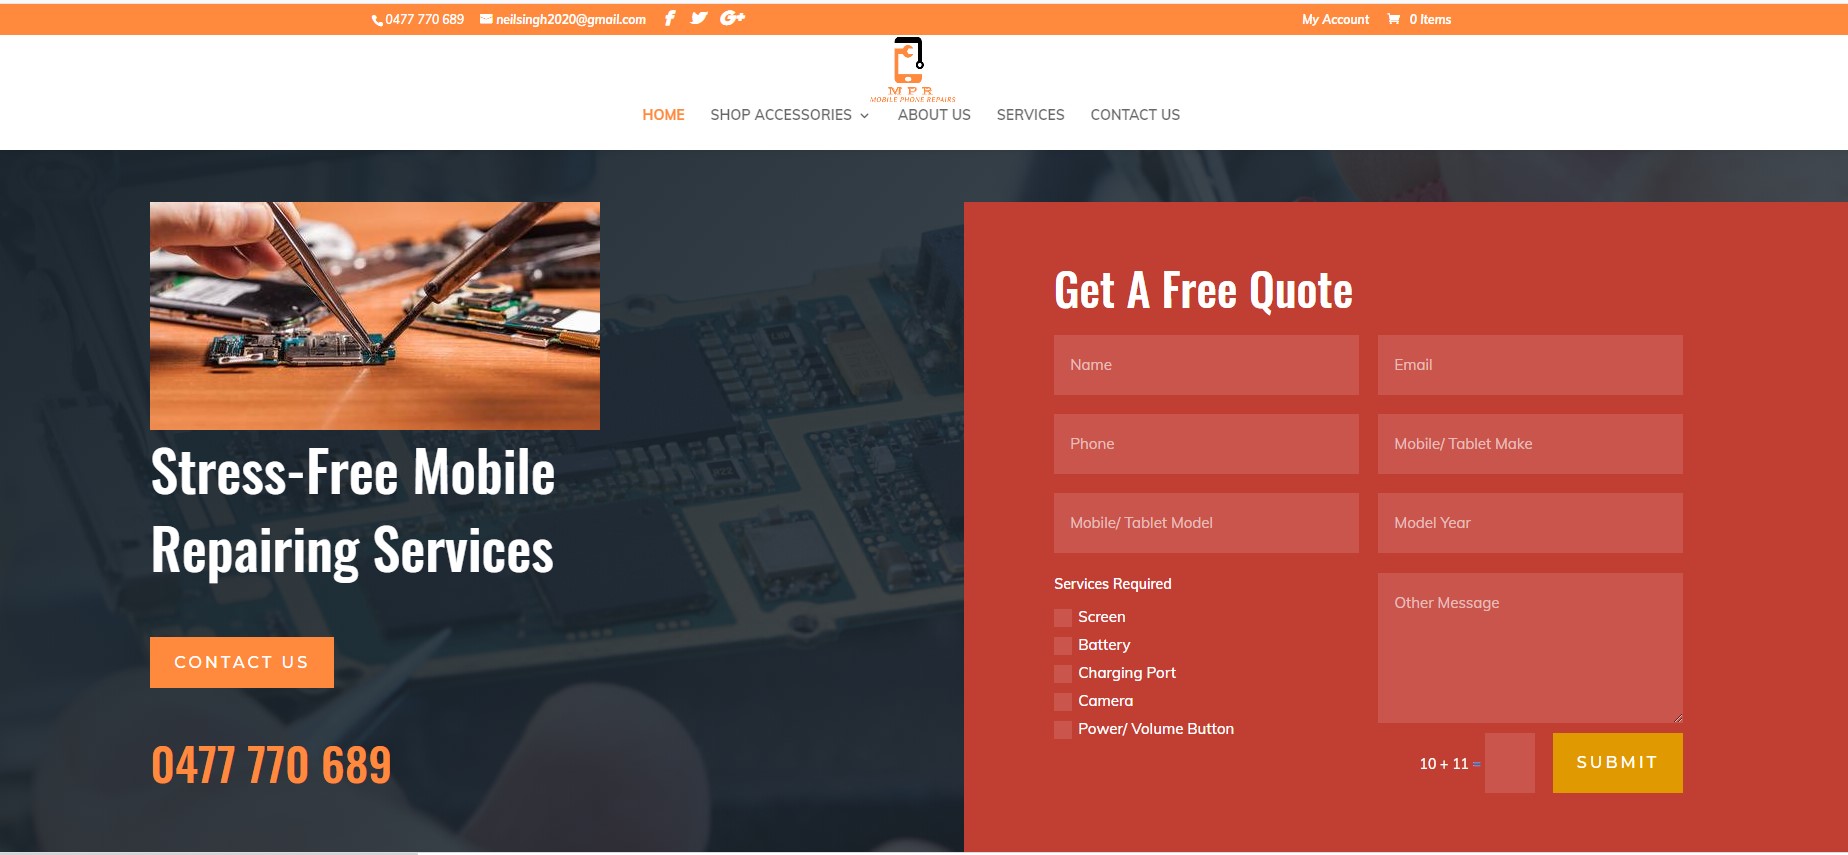 start your own mobile phone repair busienss working from home